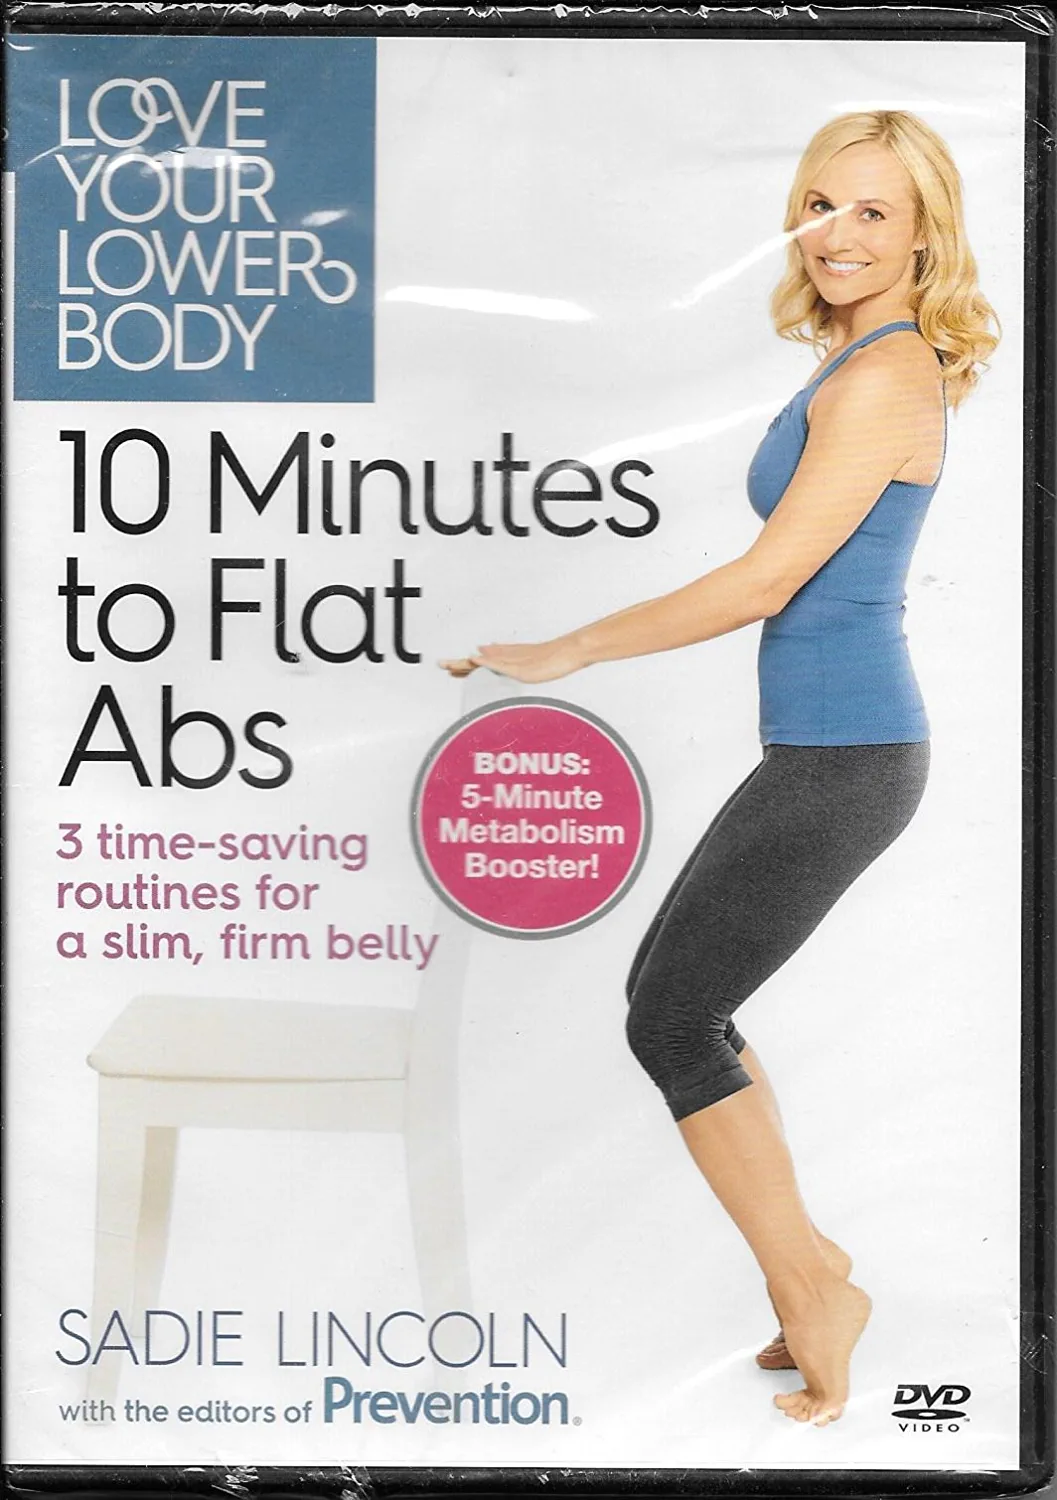 Love Your Lower Body - 10 Minutes to Flat Abs (DVD)